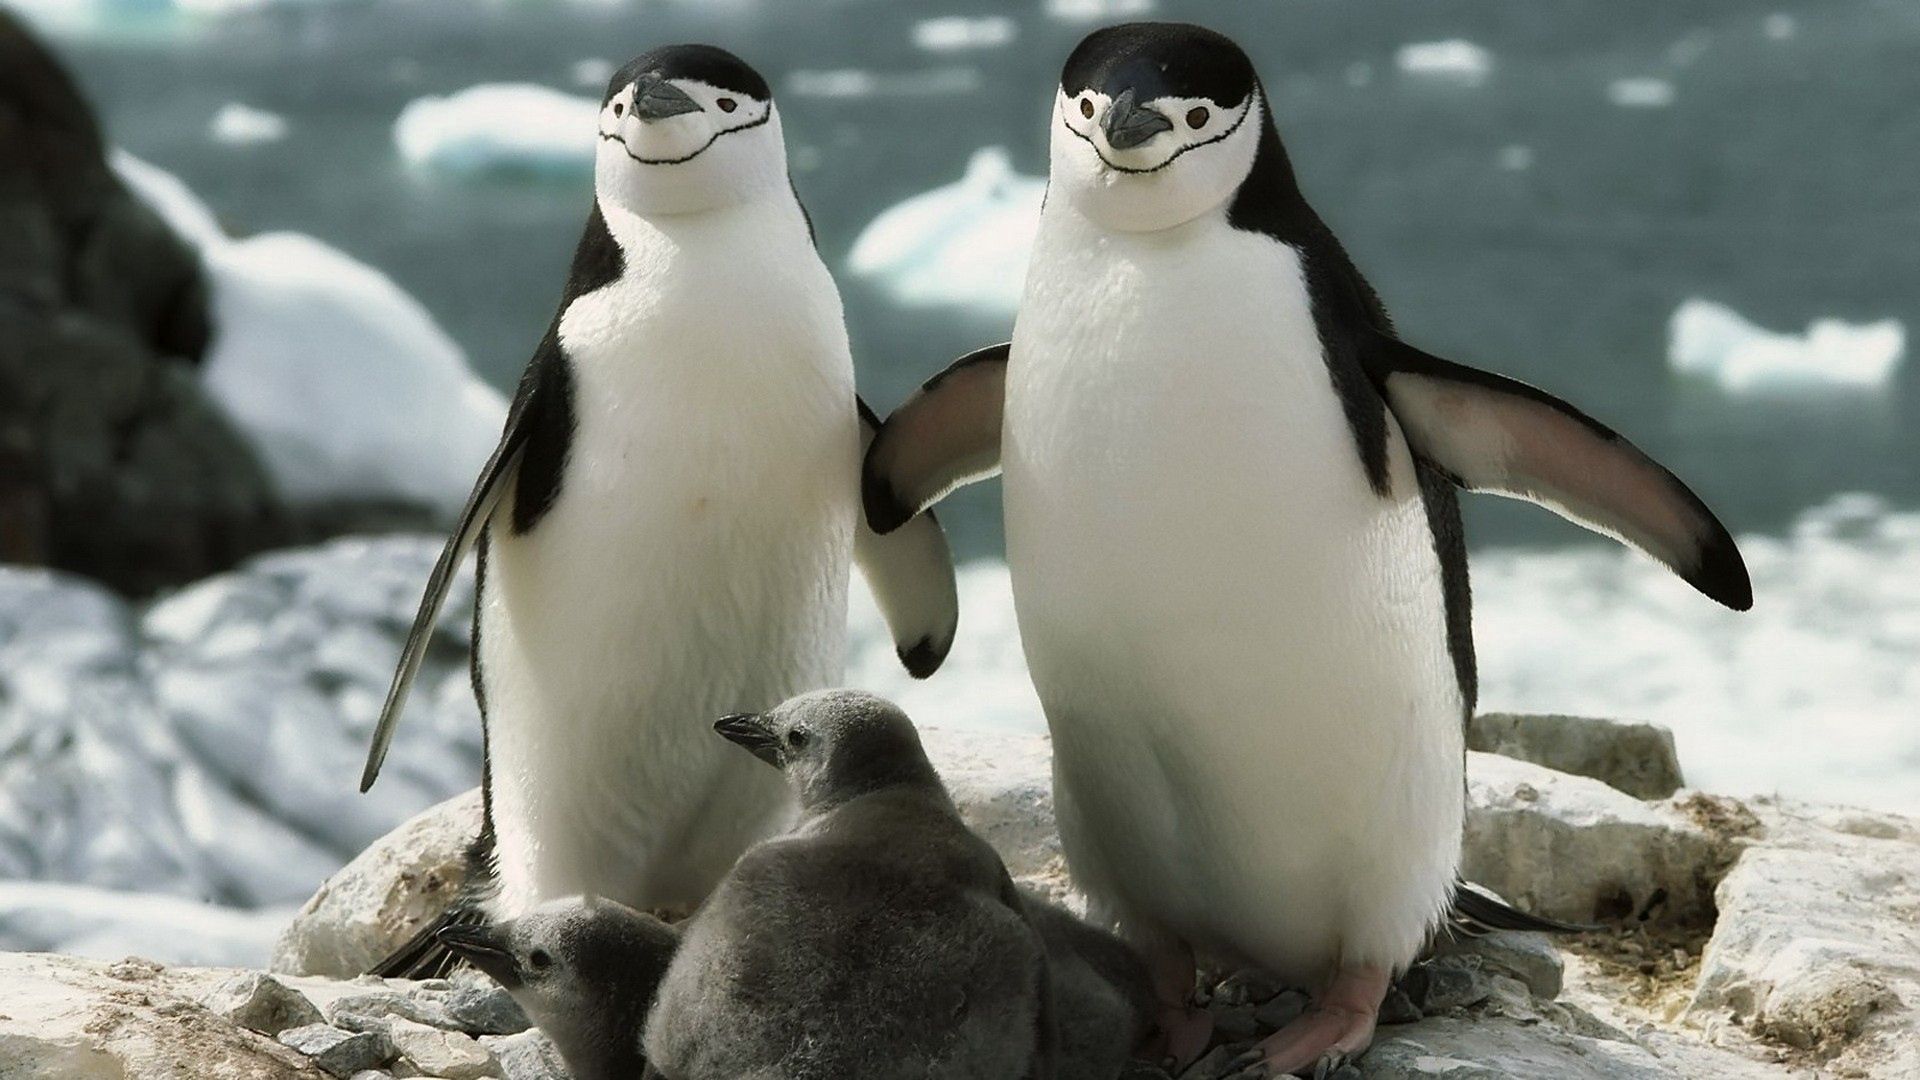 care, animals, pinguins, young, stroll, family, joey mobile wallpaper